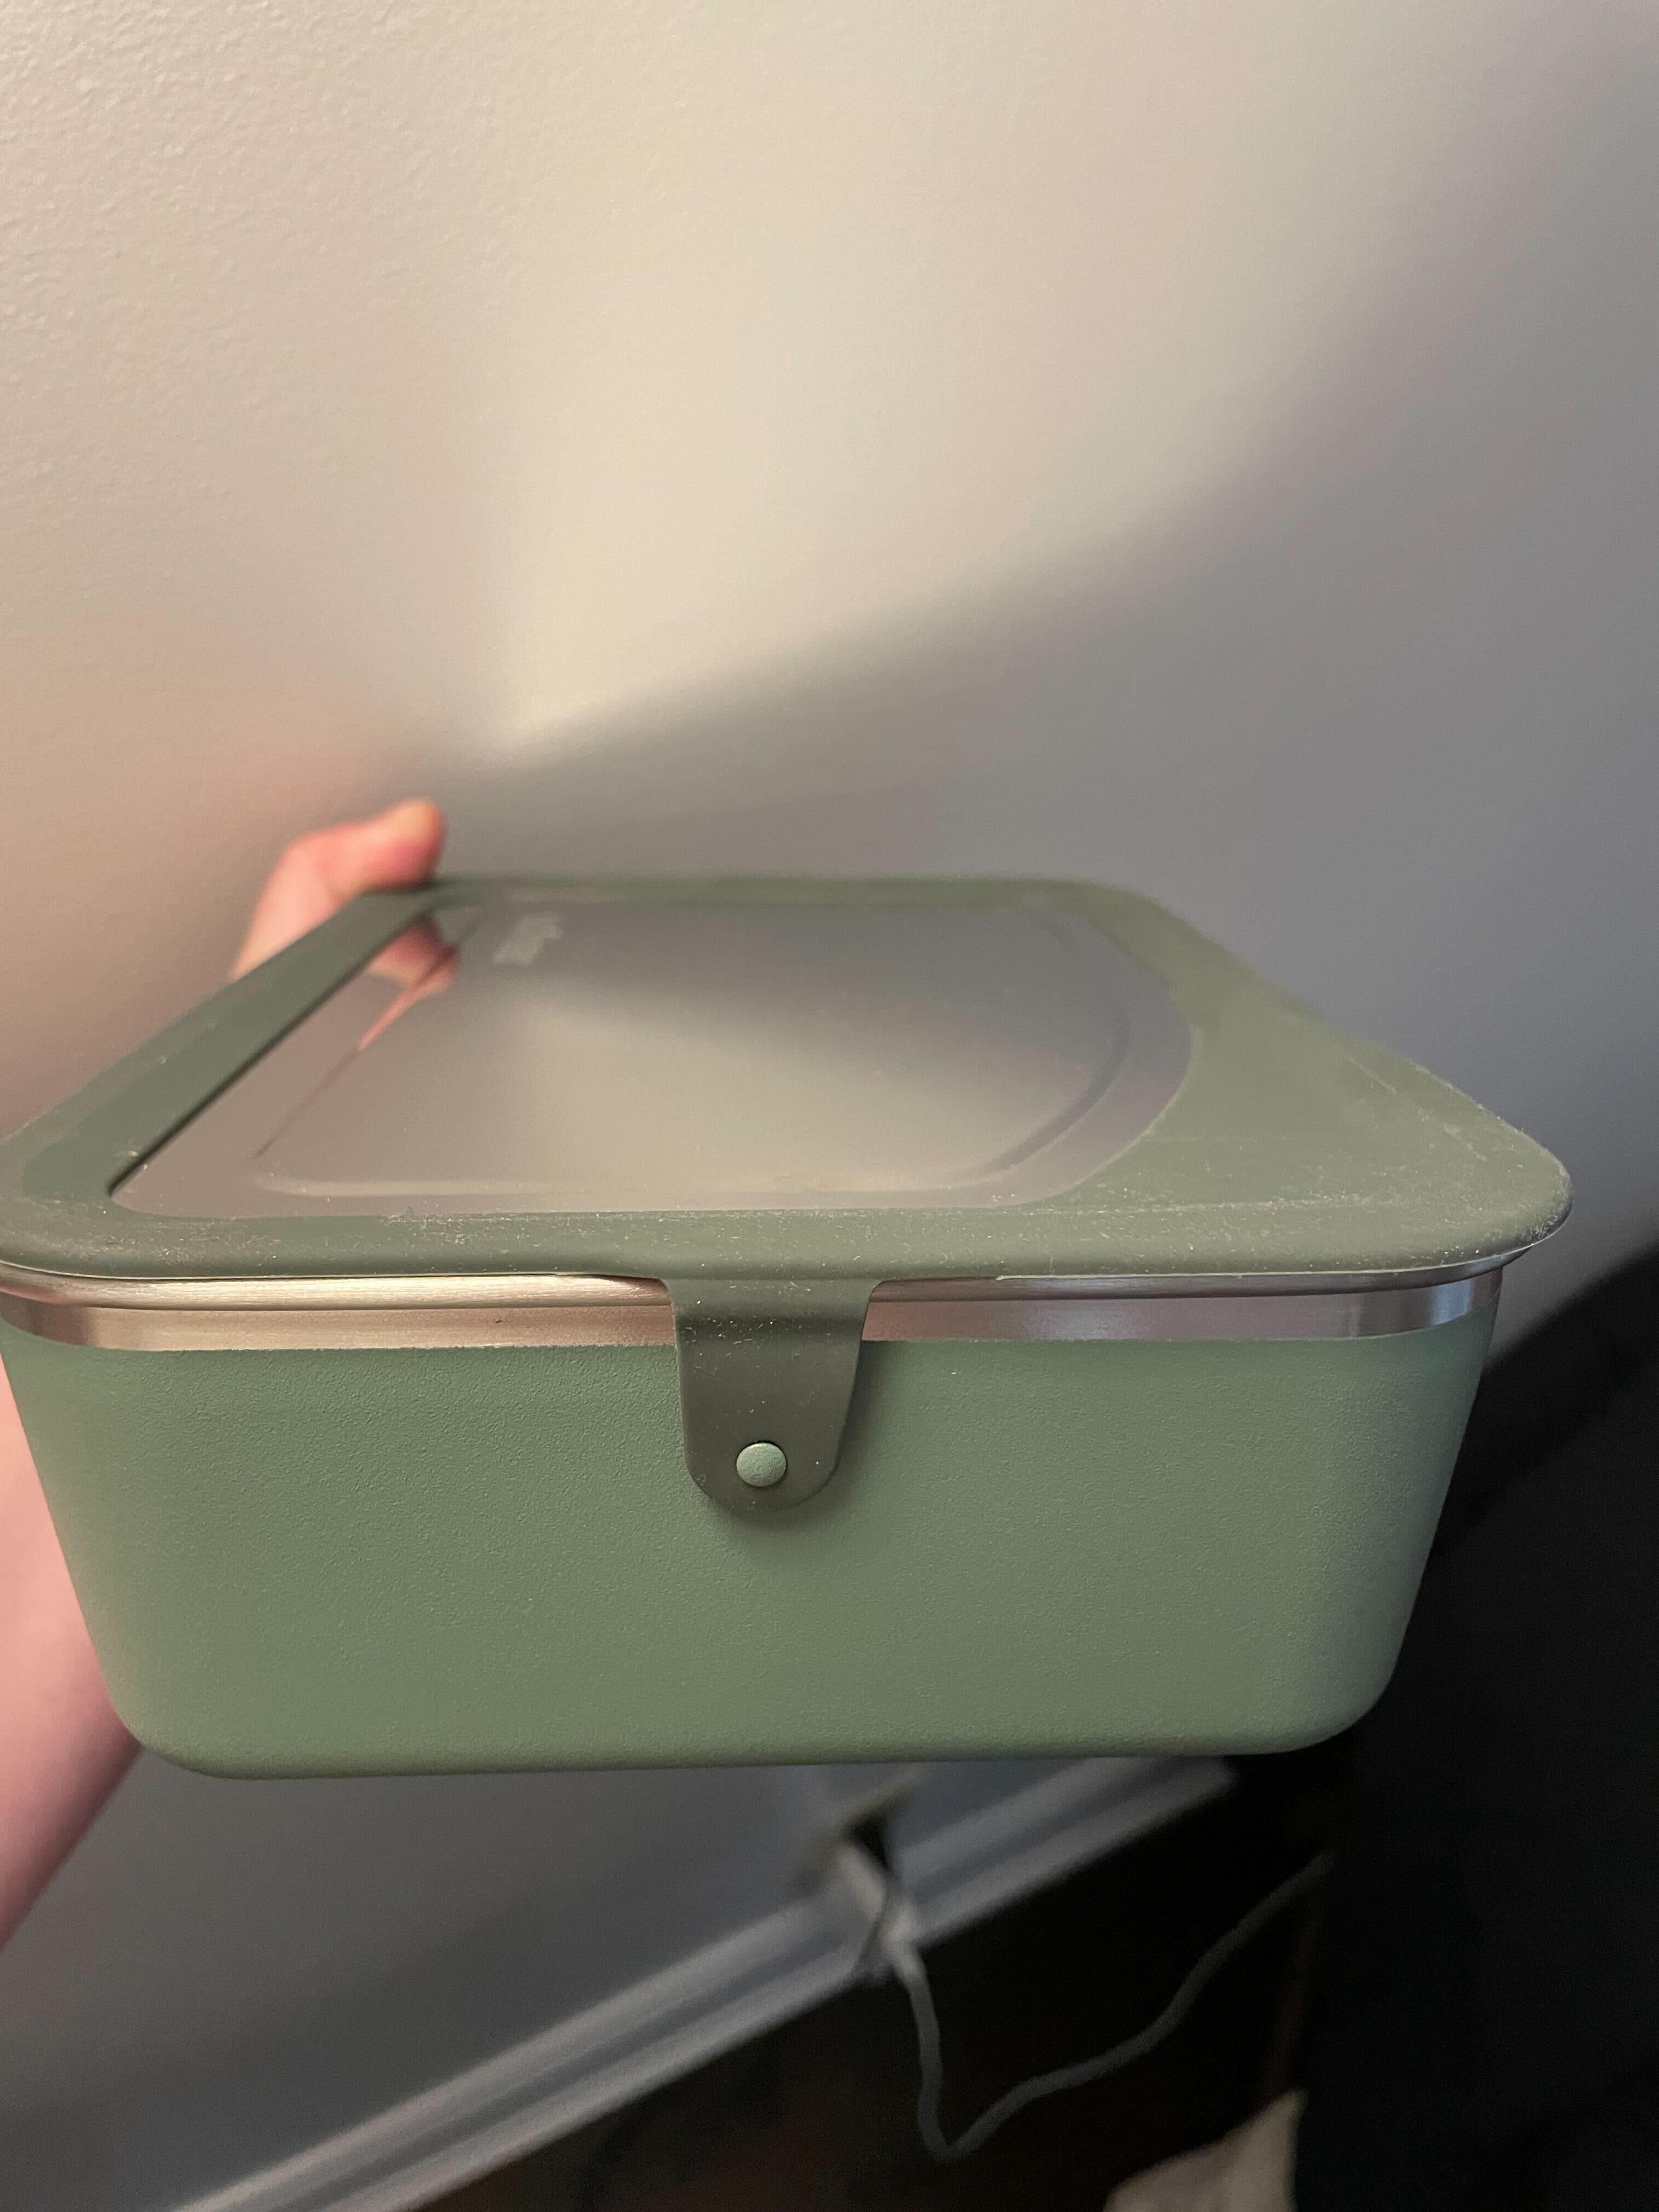 Caraway's Sleek Food Storage System Has Us Ditching All Our Takeout  Containers - Kitchen Critic